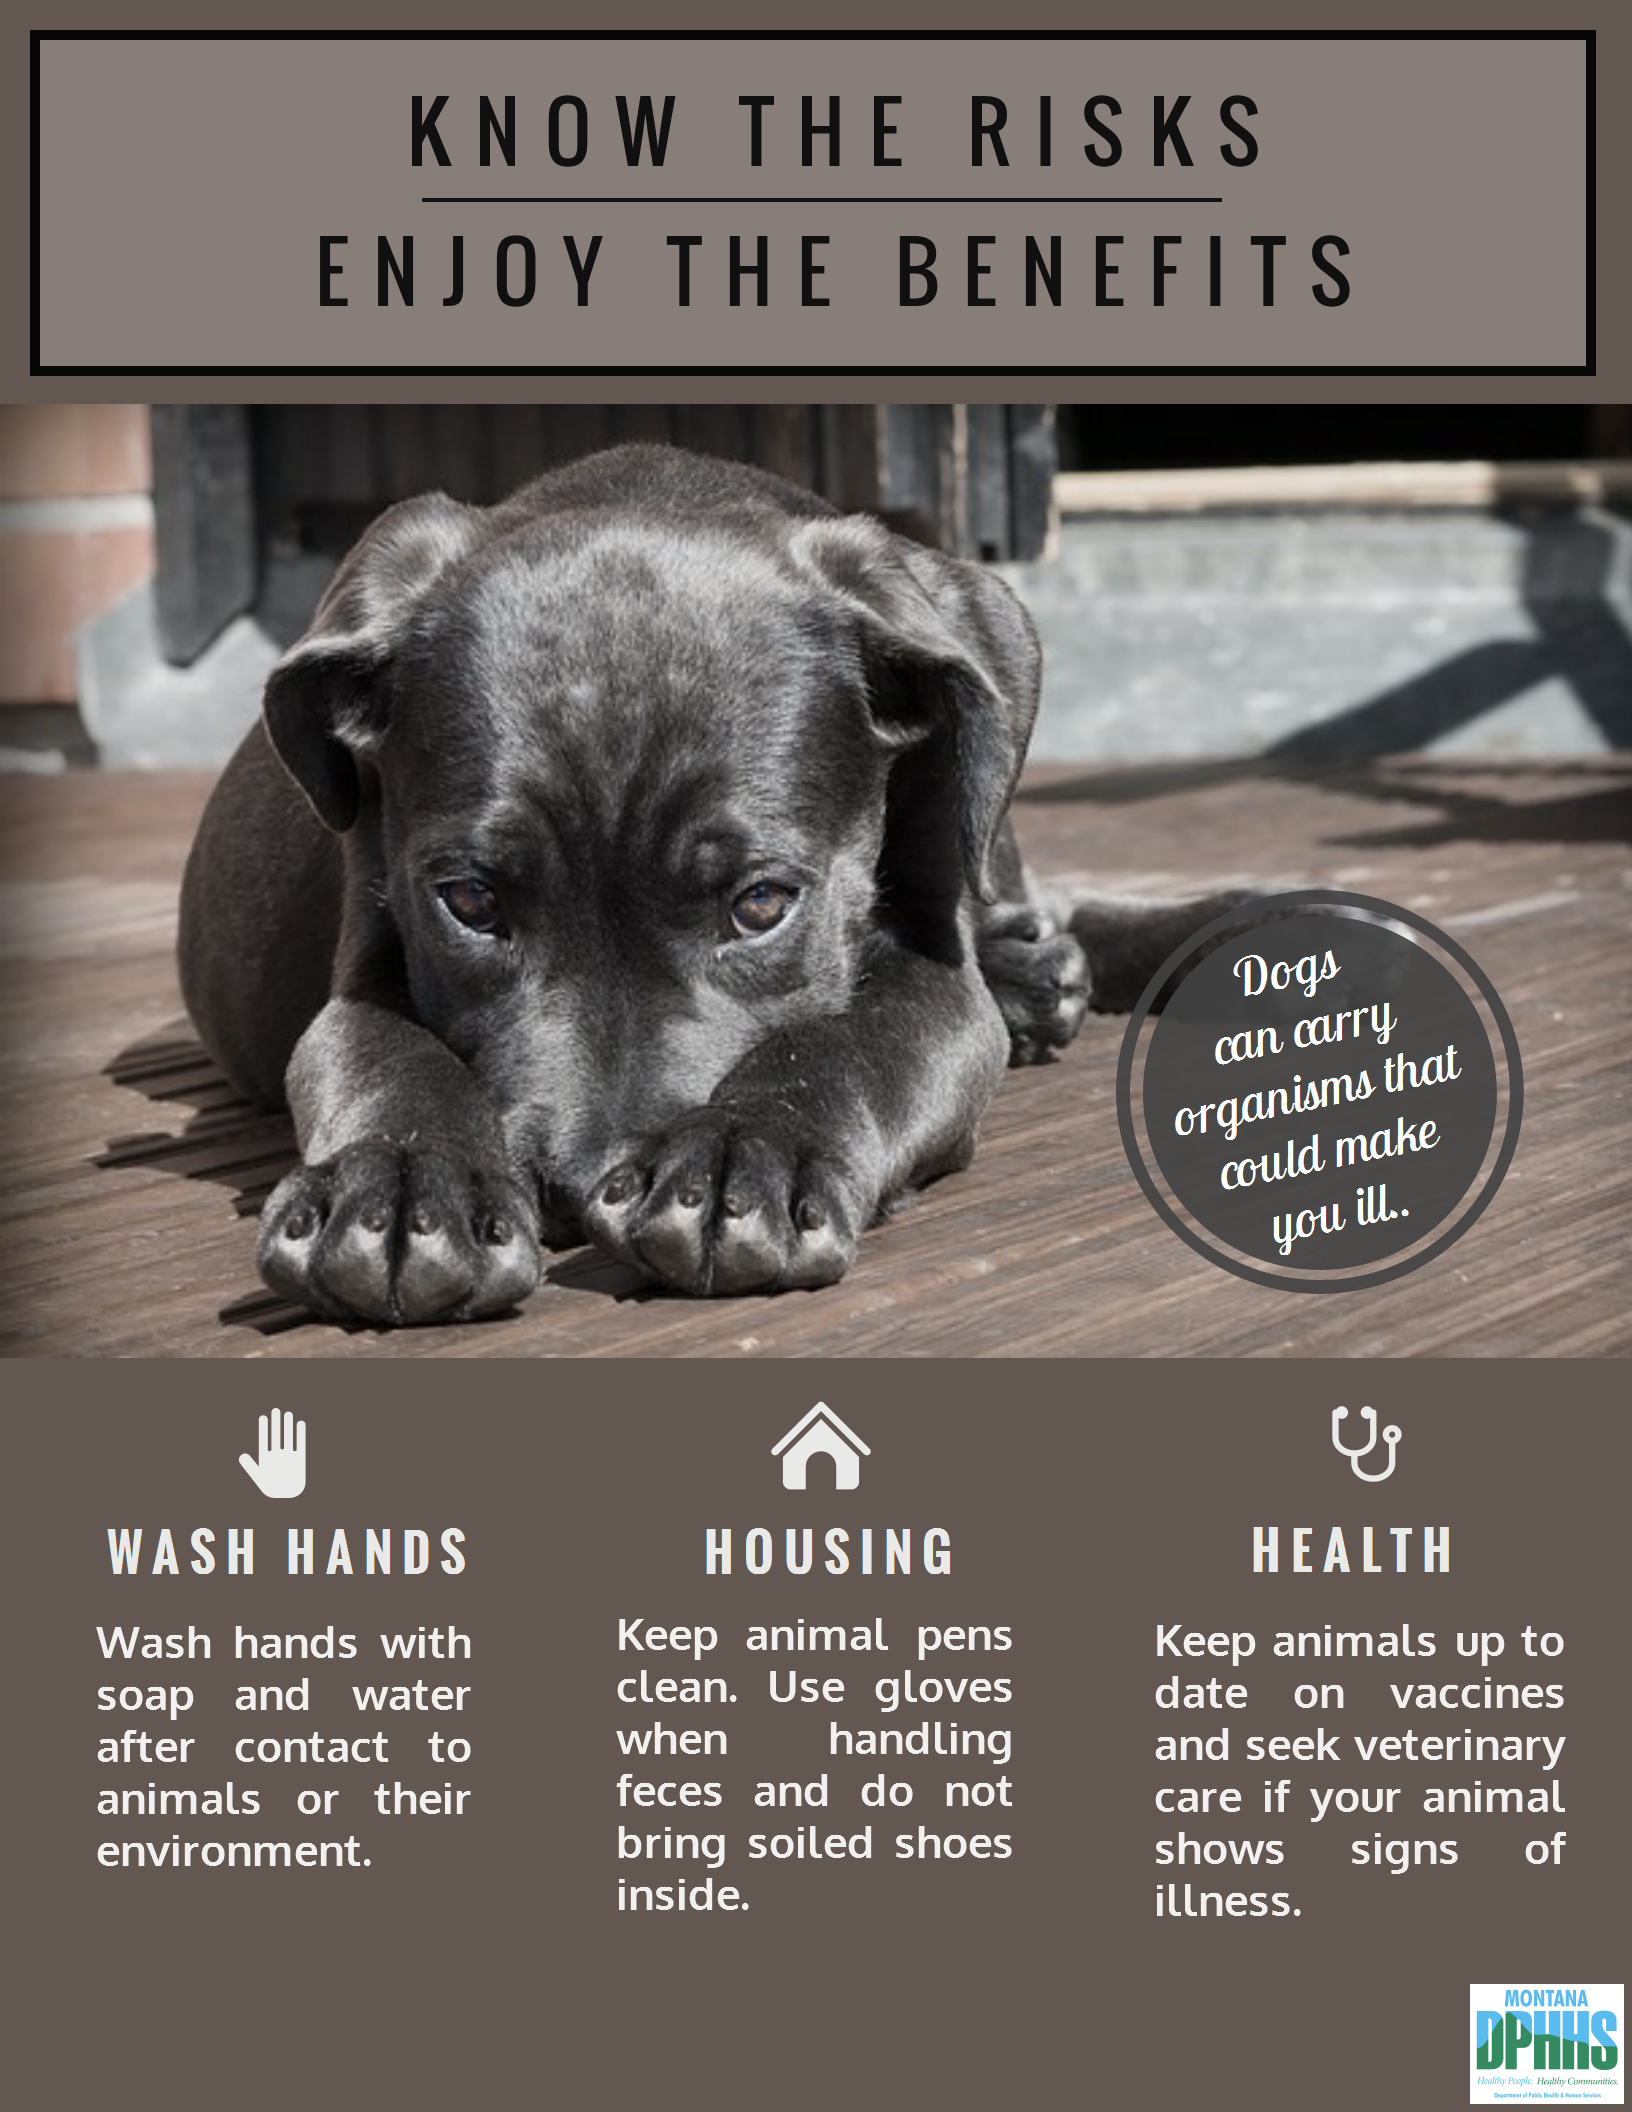 Know the risks, enjoy the benefits (pets)